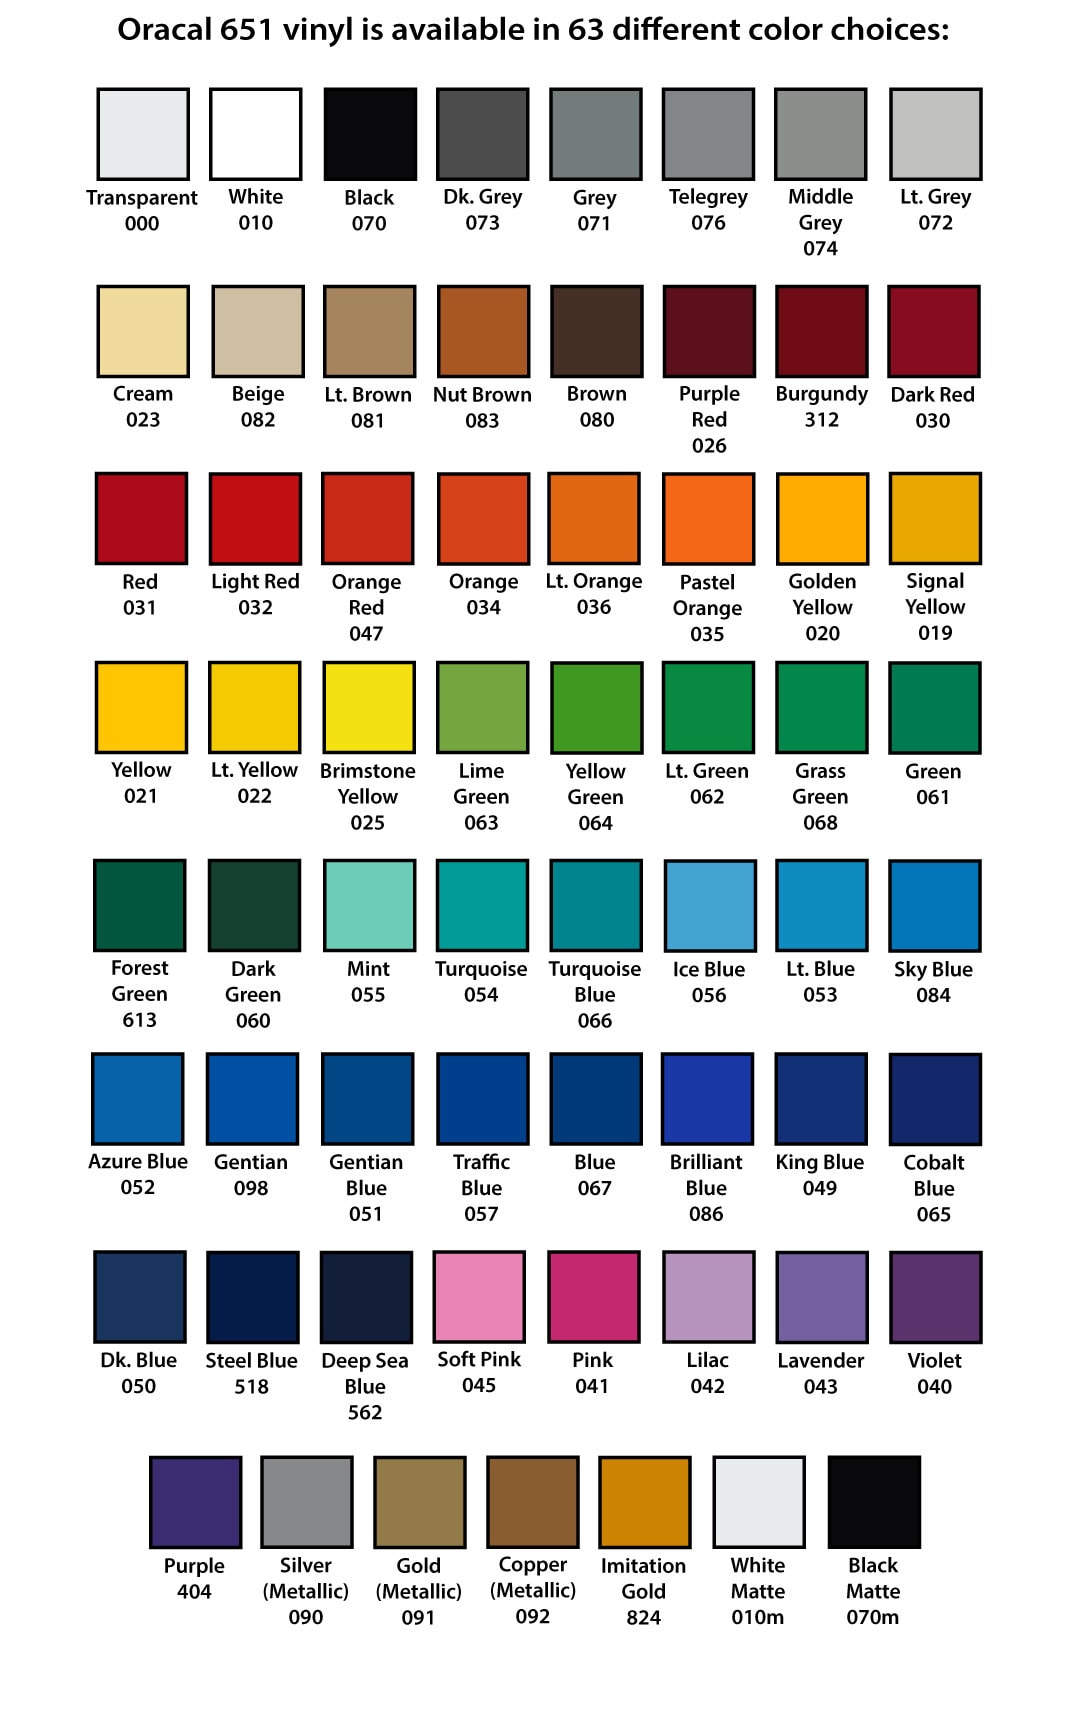 Oracal 651 Intermediate Calendered Film Color Chart